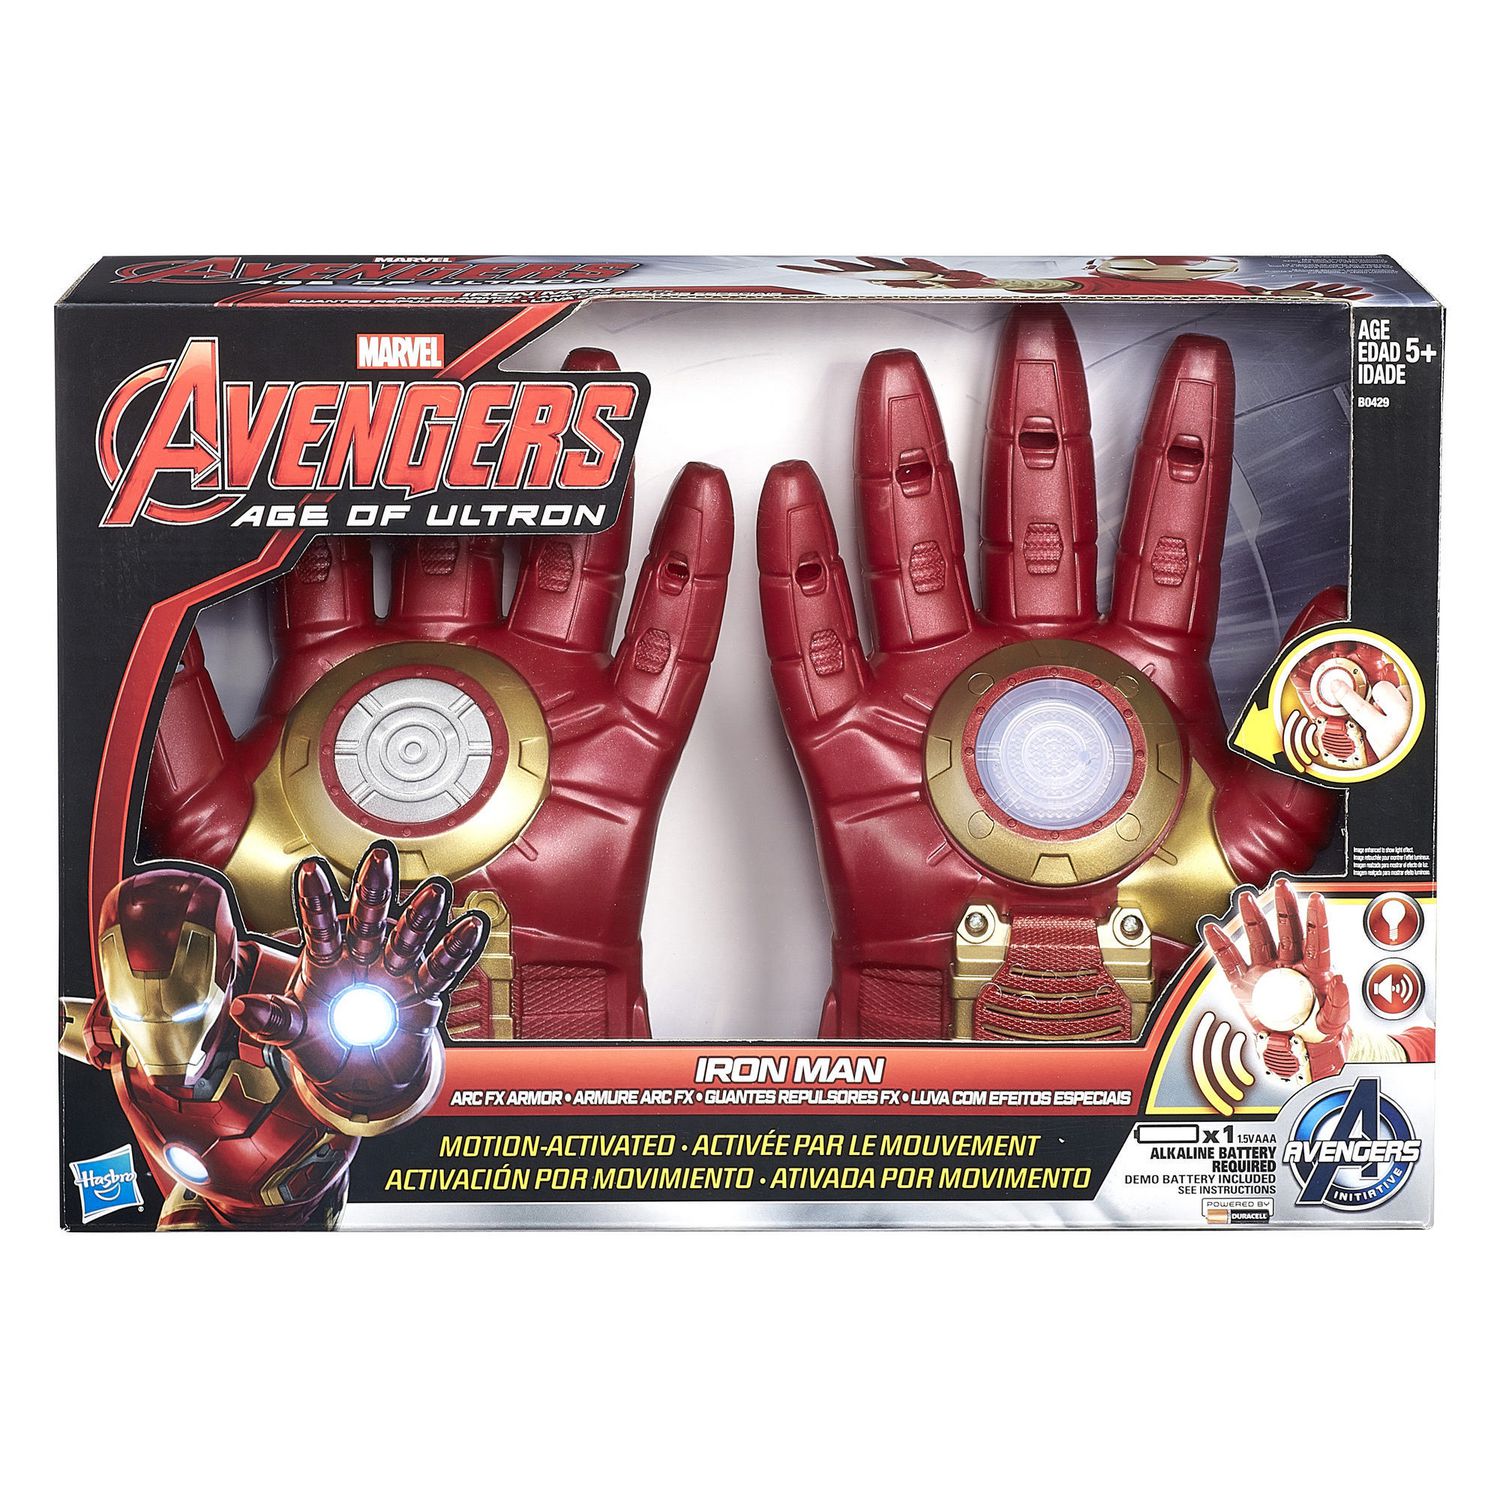 2 Pack Marvel Avengers Age of Ultron Iron Man Arc FX Armor Electronic Gloves 